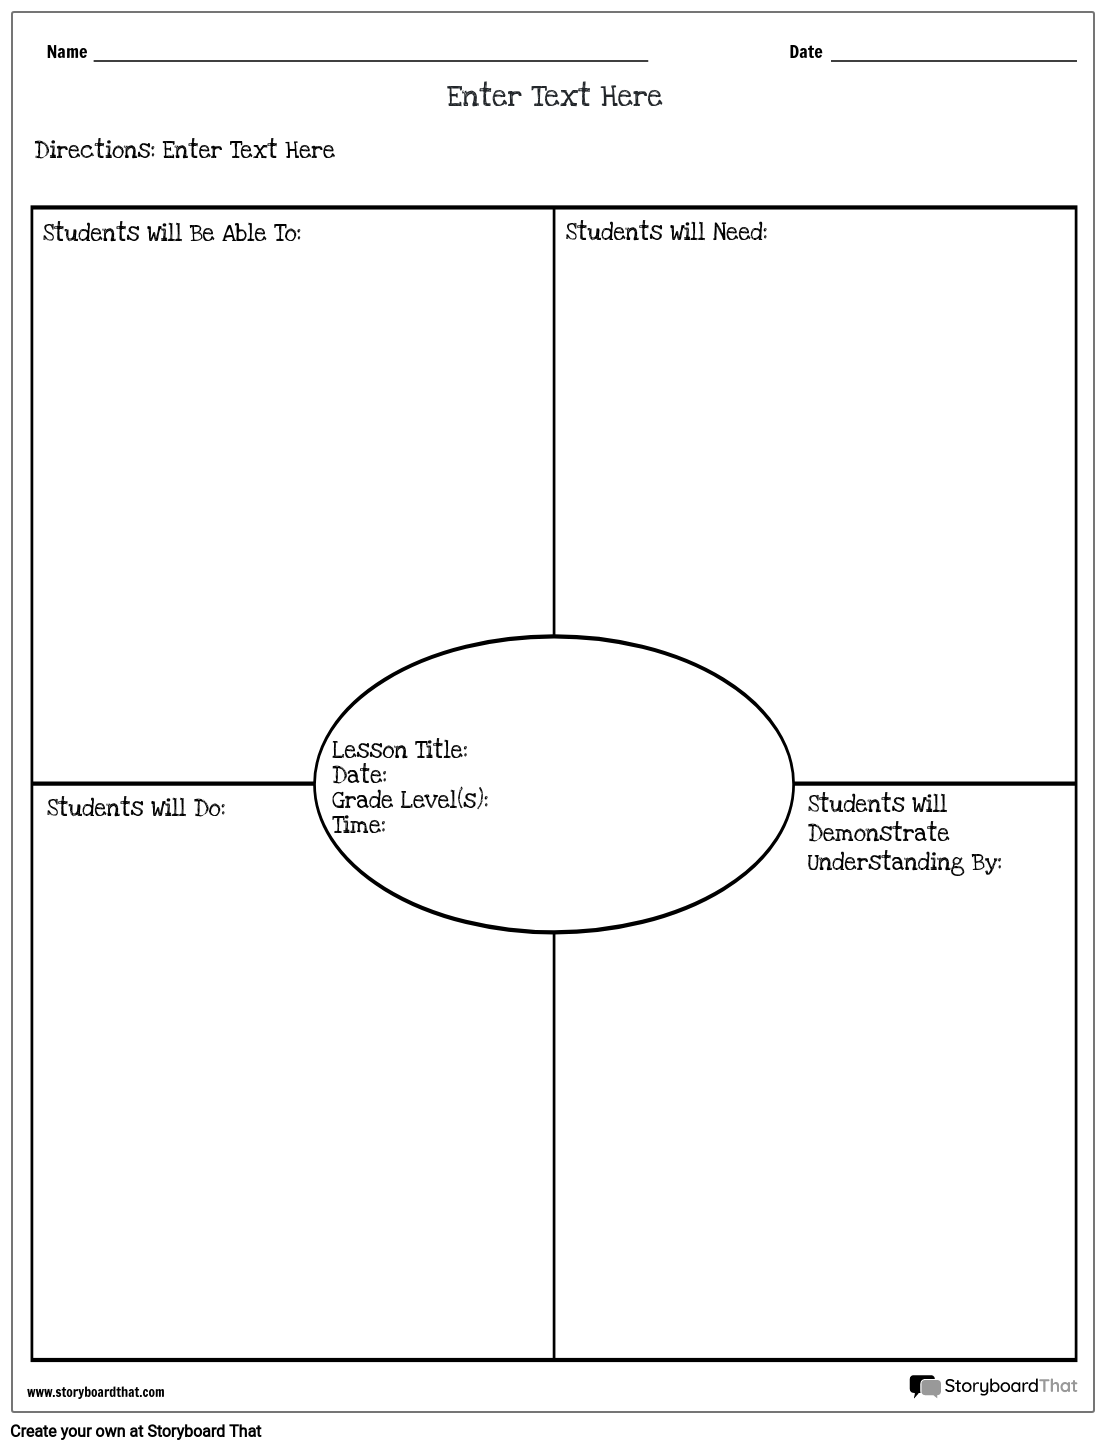 Ready-to-Use Lesson Planner for Teachers